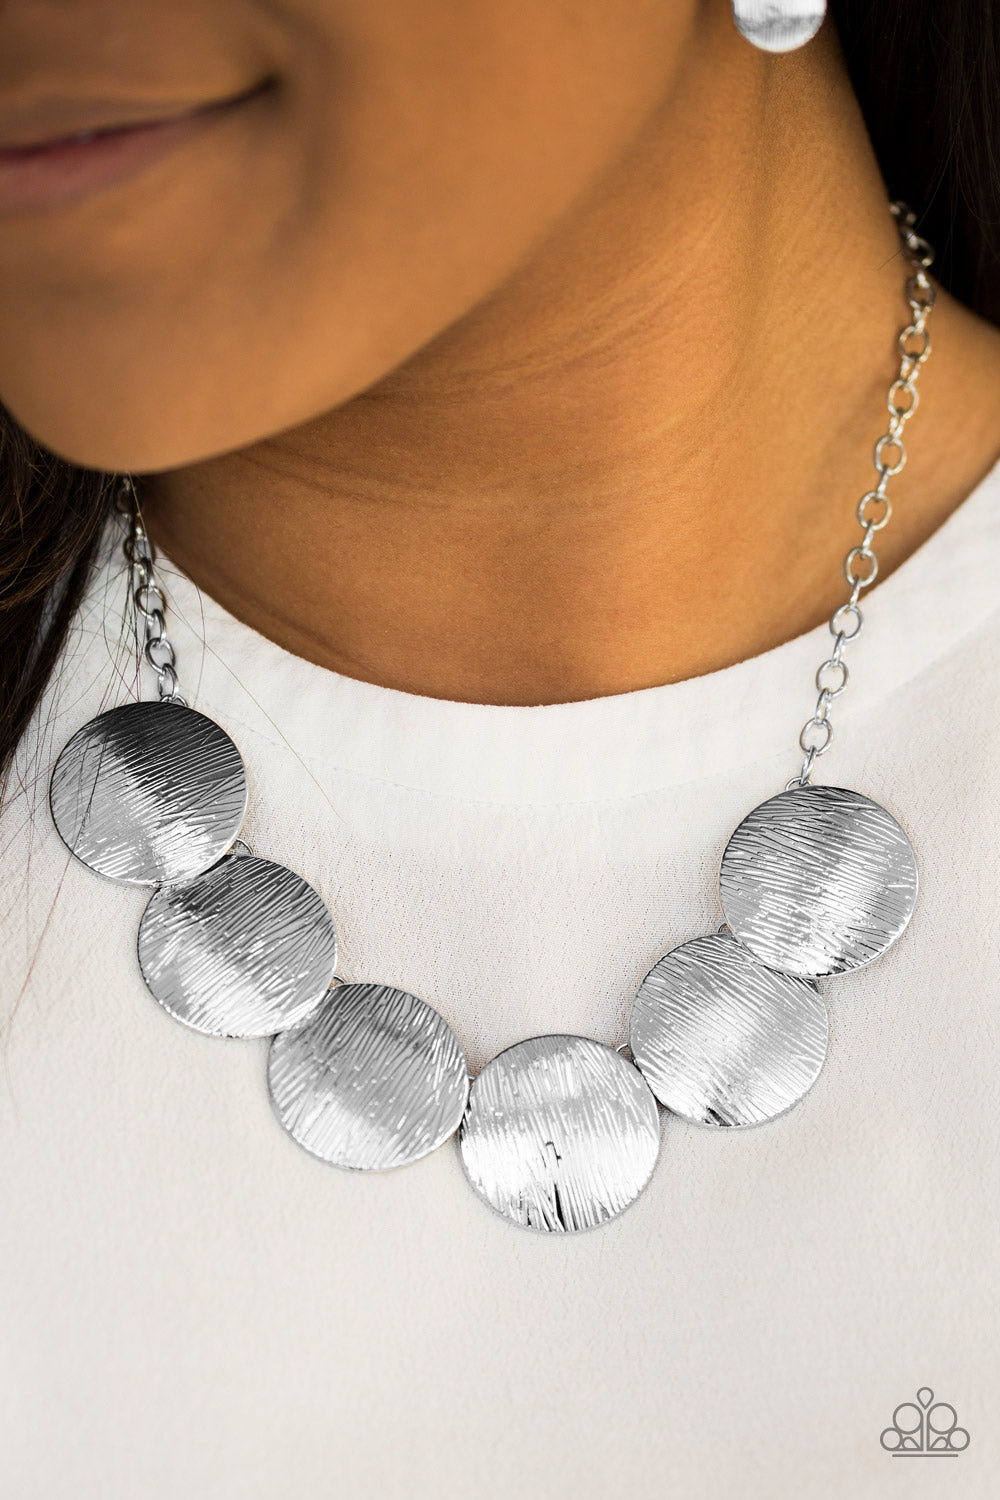 Paparazzi Accessories Glued To The SPOTLIGHT - Silver Necklace & Earrings 